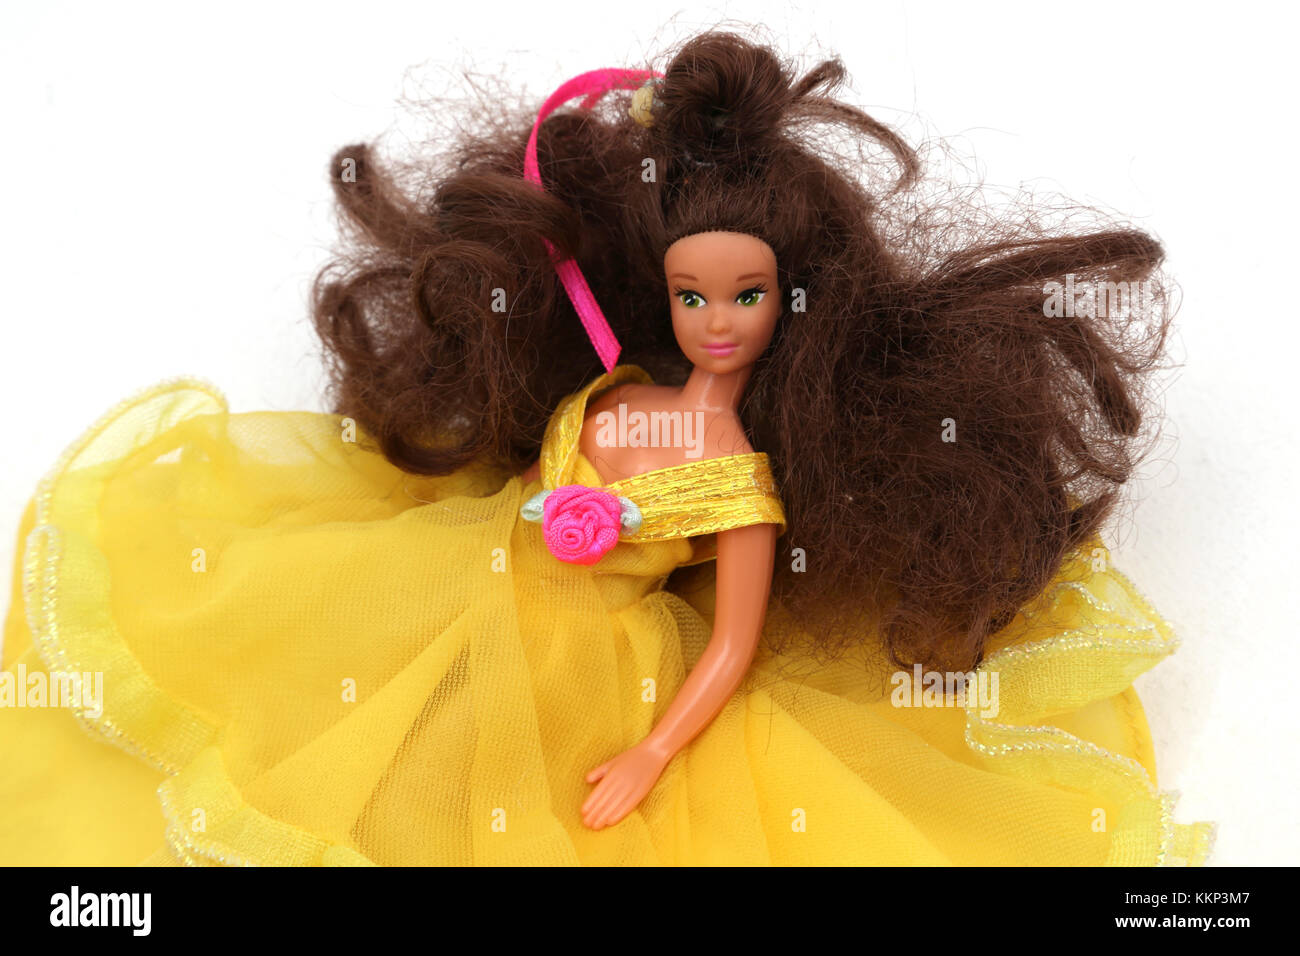 Belle Doll From Disney's Beauty and the Beast Stock Photo